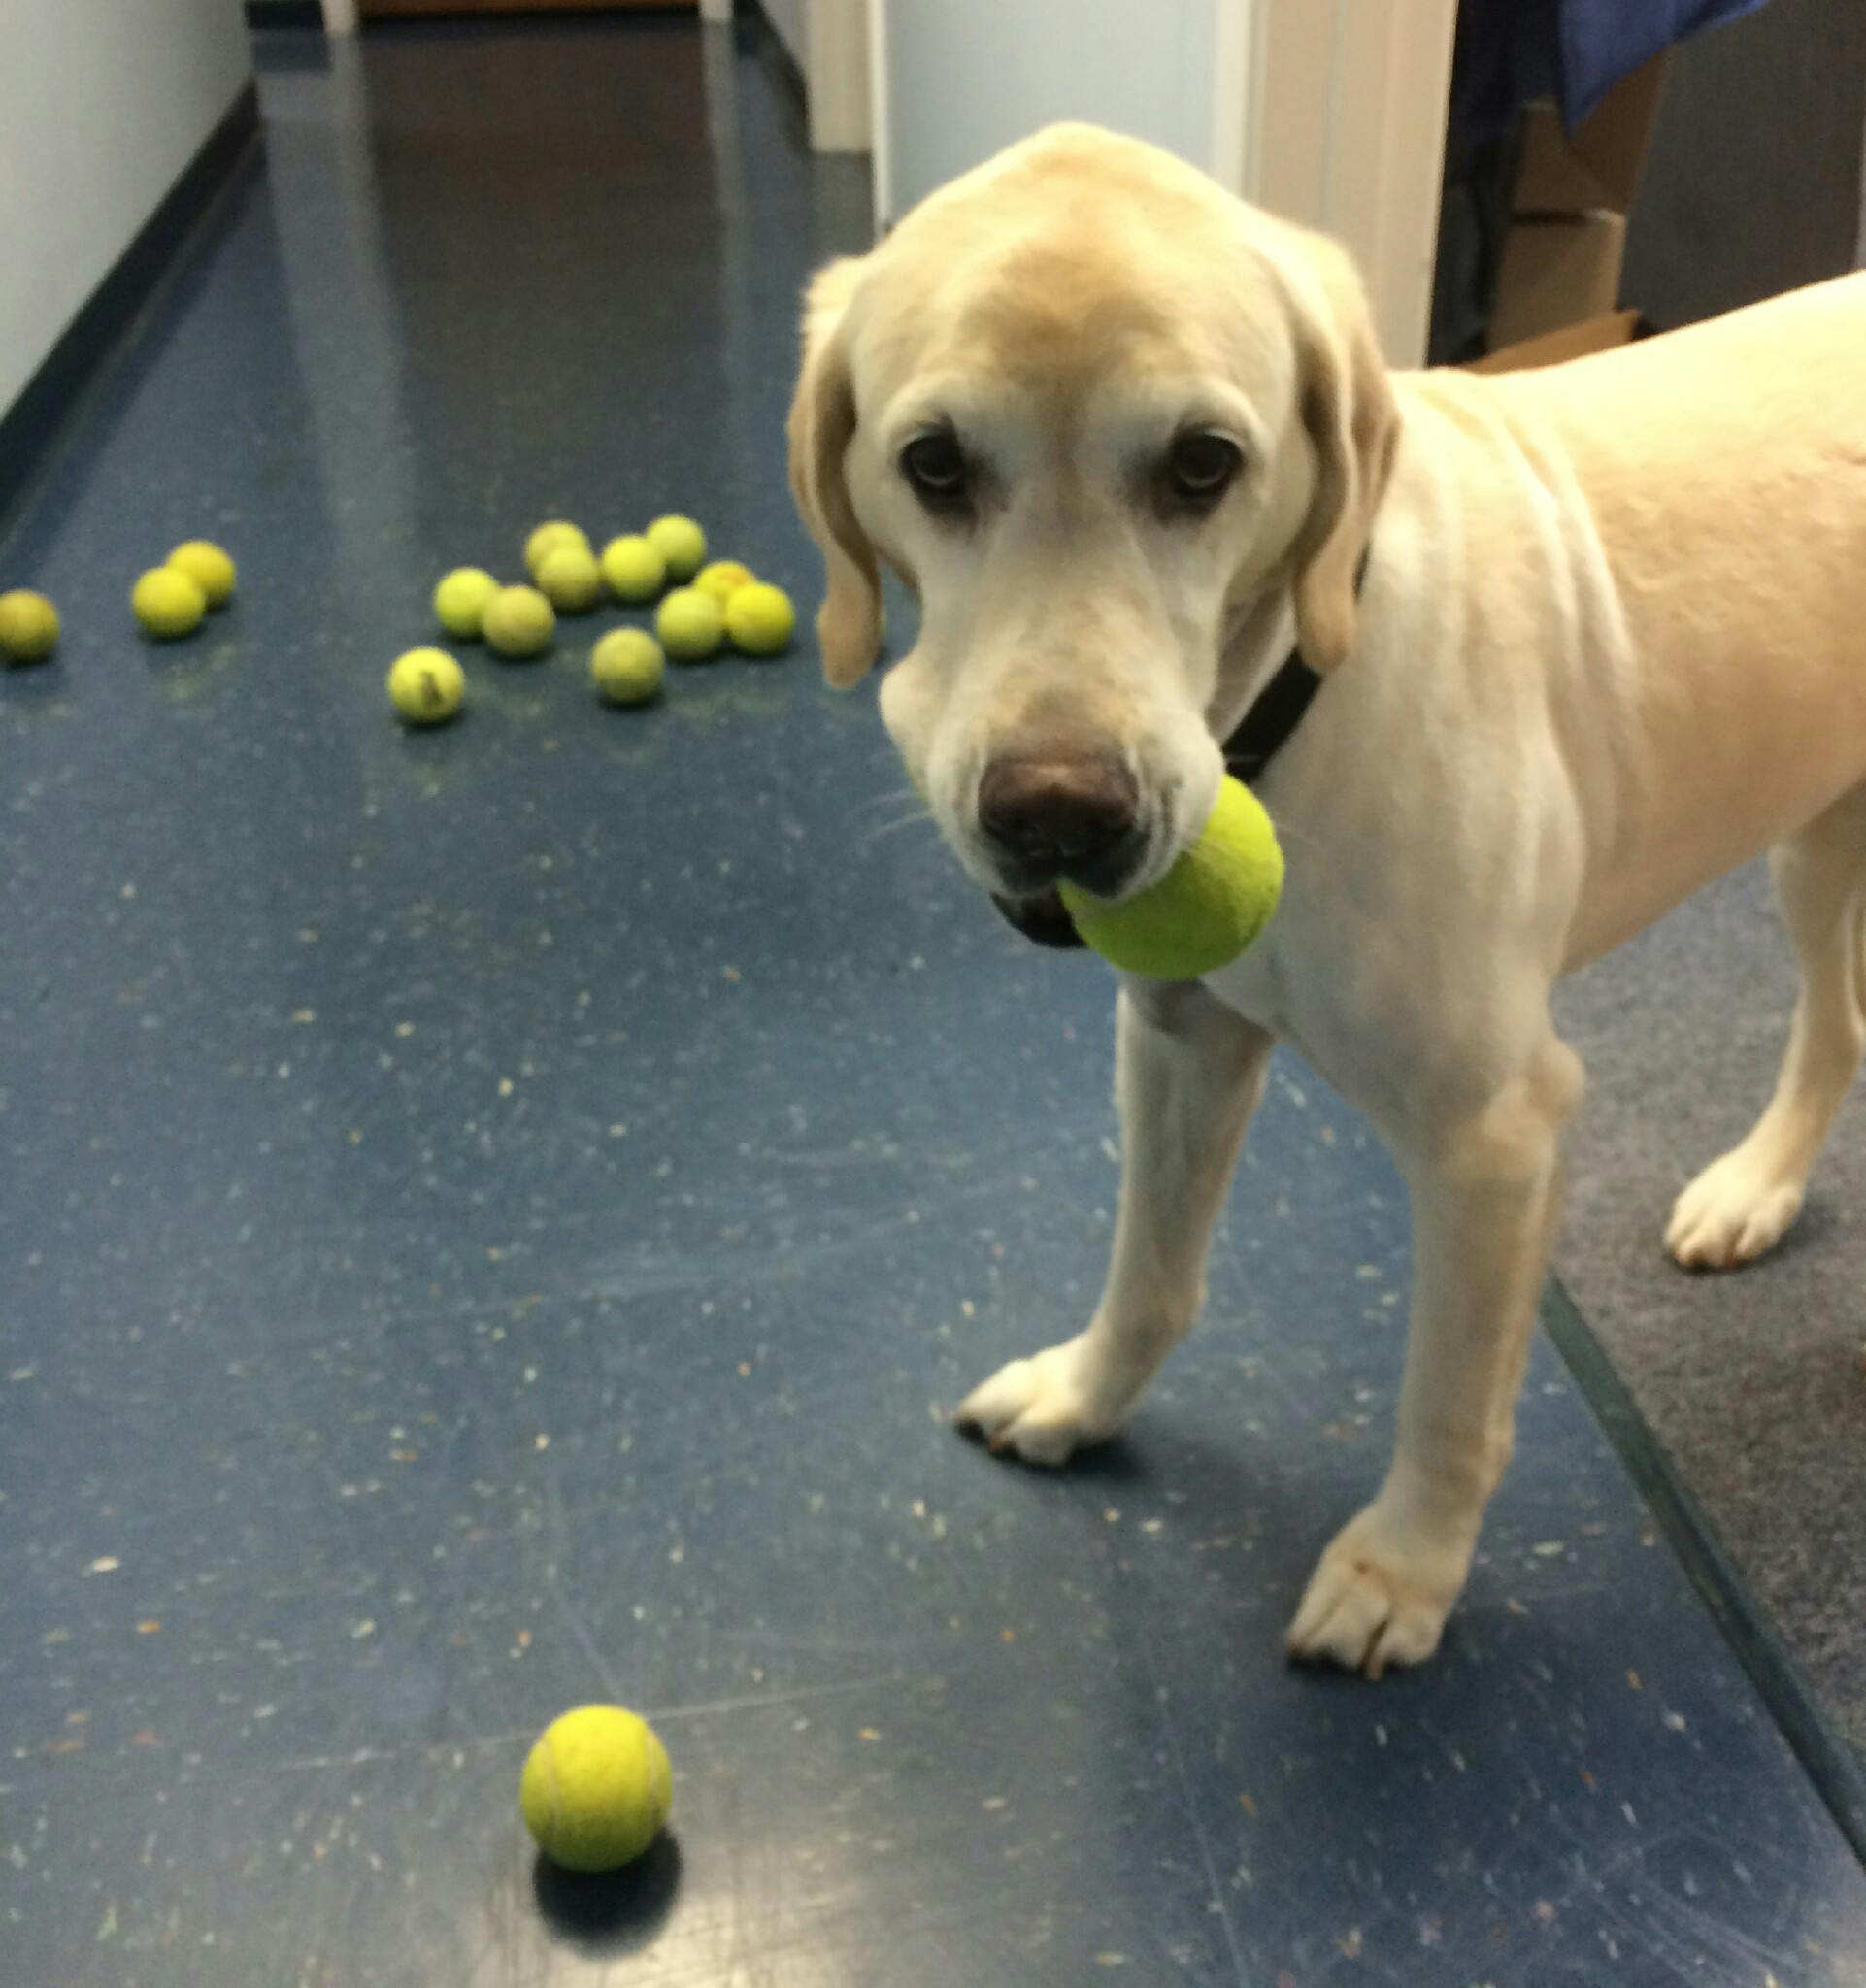 Ember, a lab, surrounded by tennis balls